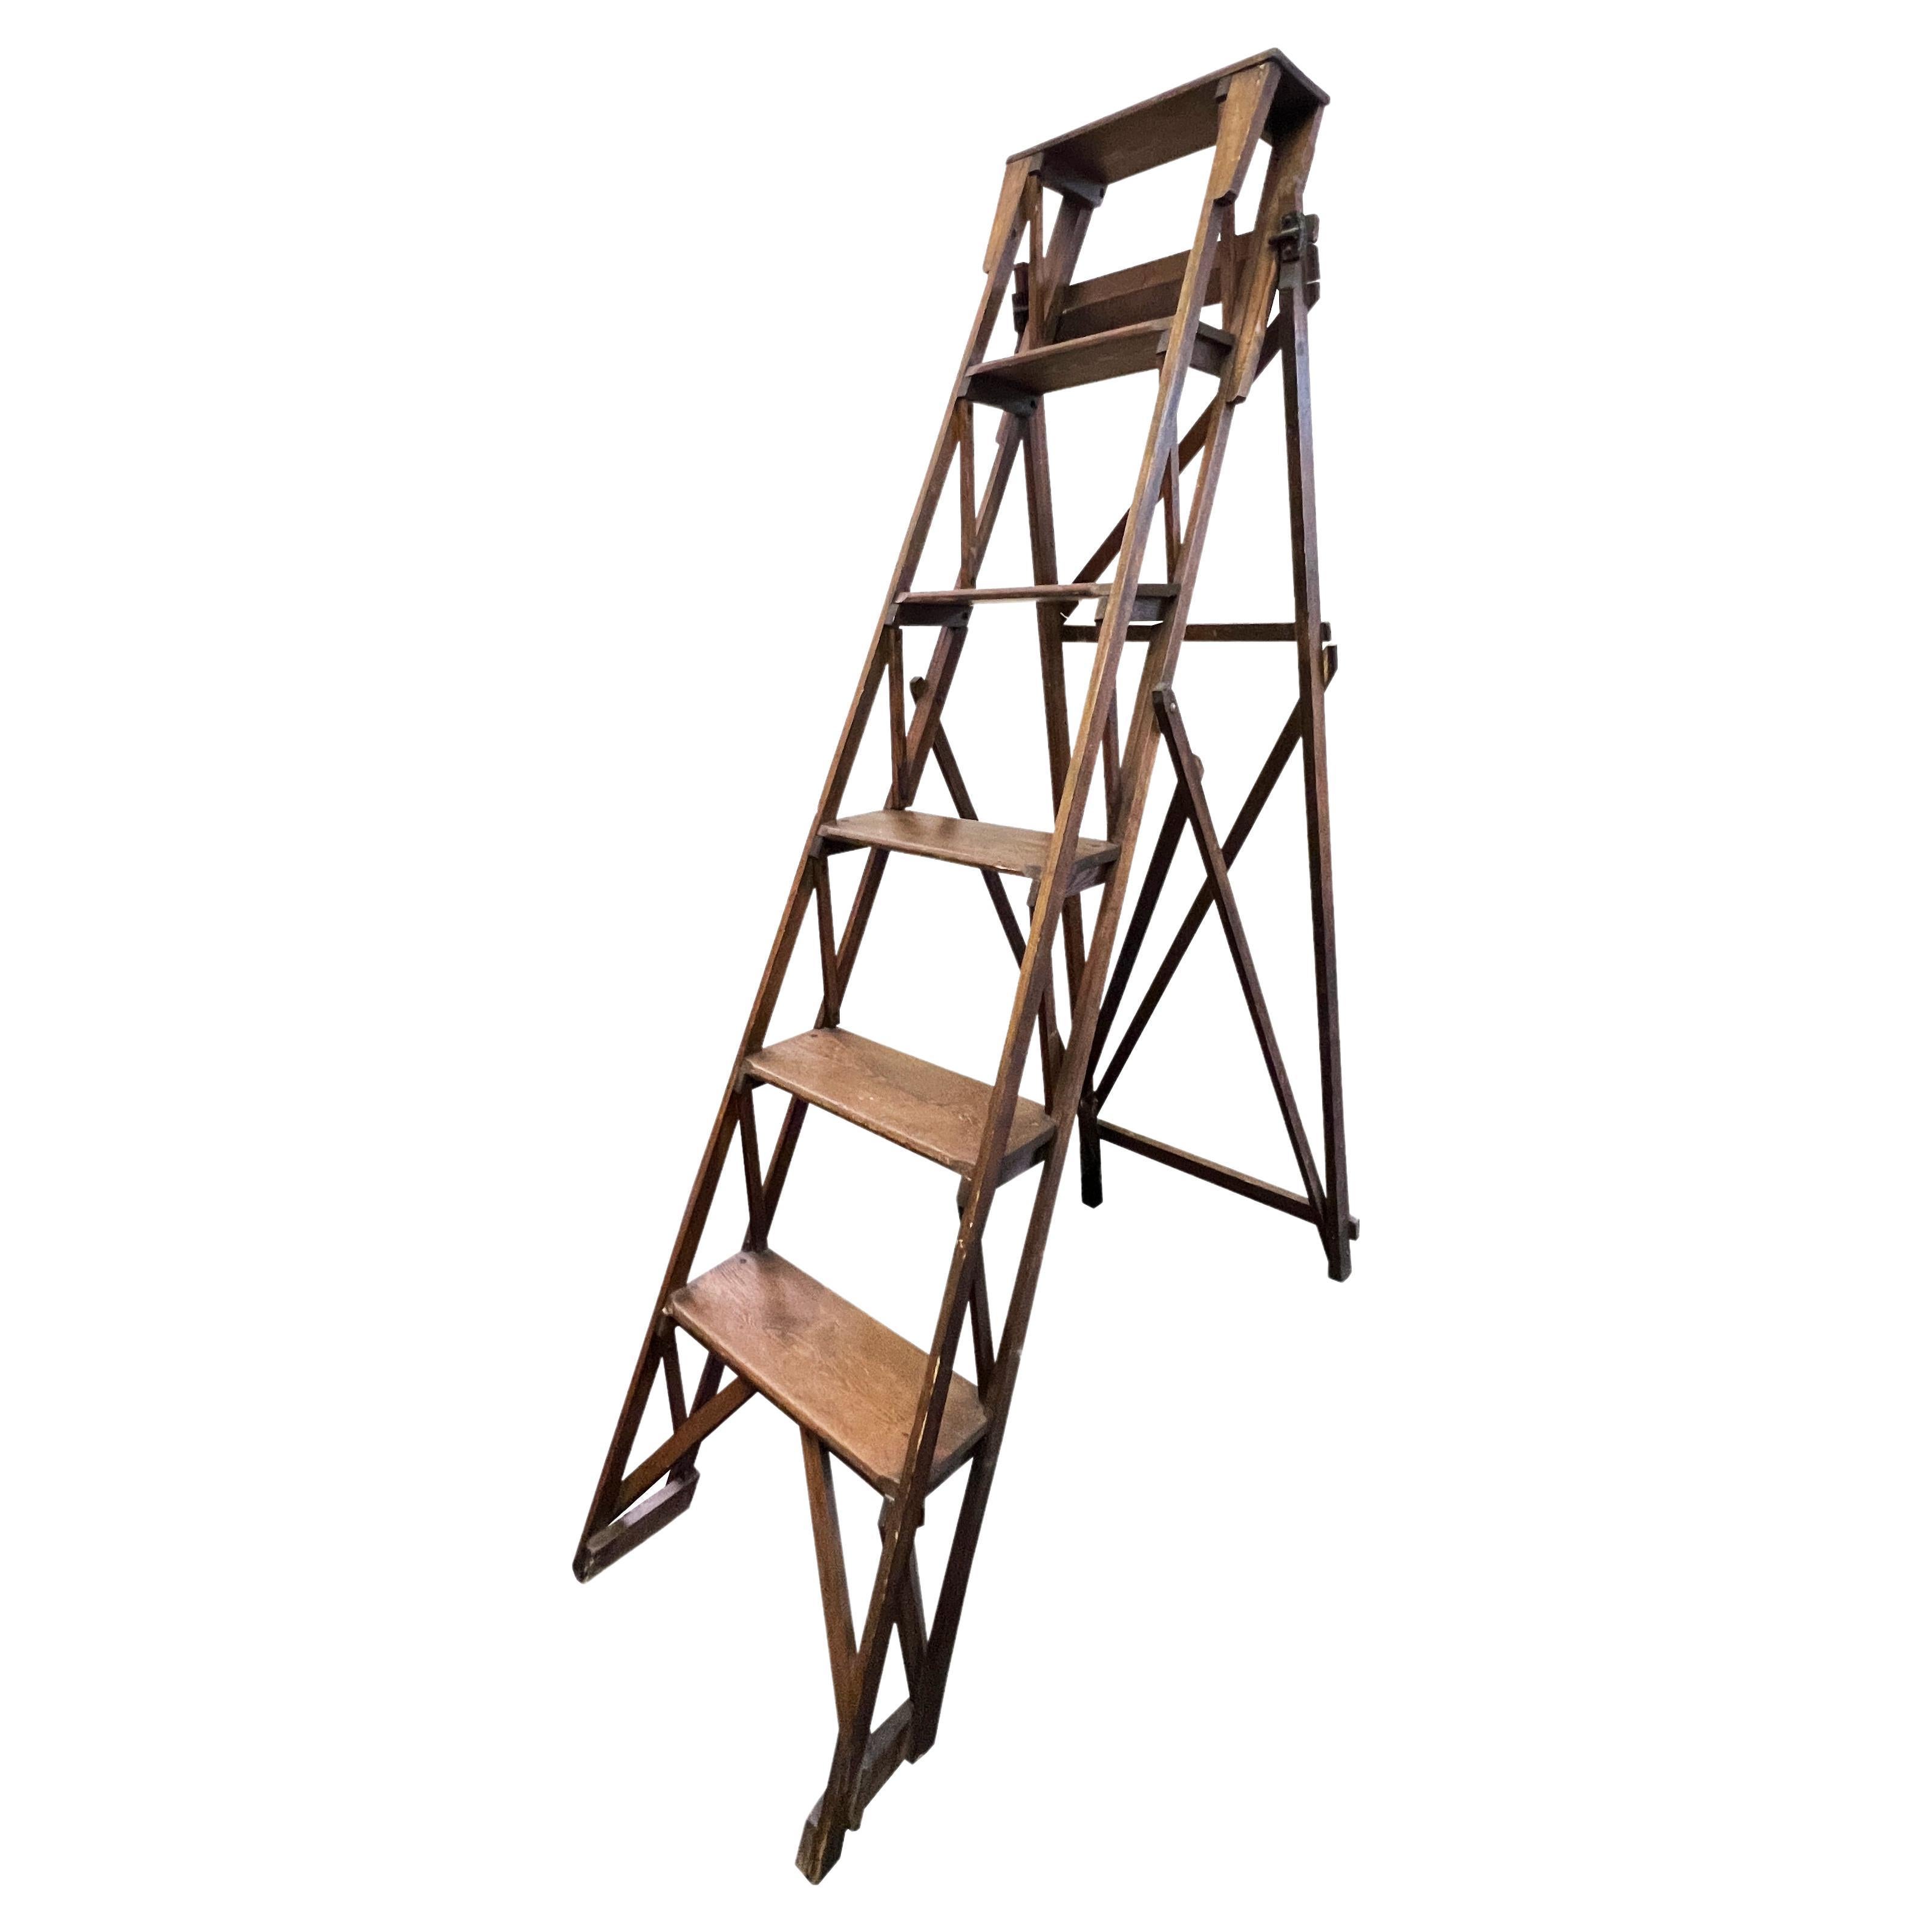 Wood Architectural English Ladder Circa 1970 For Sale